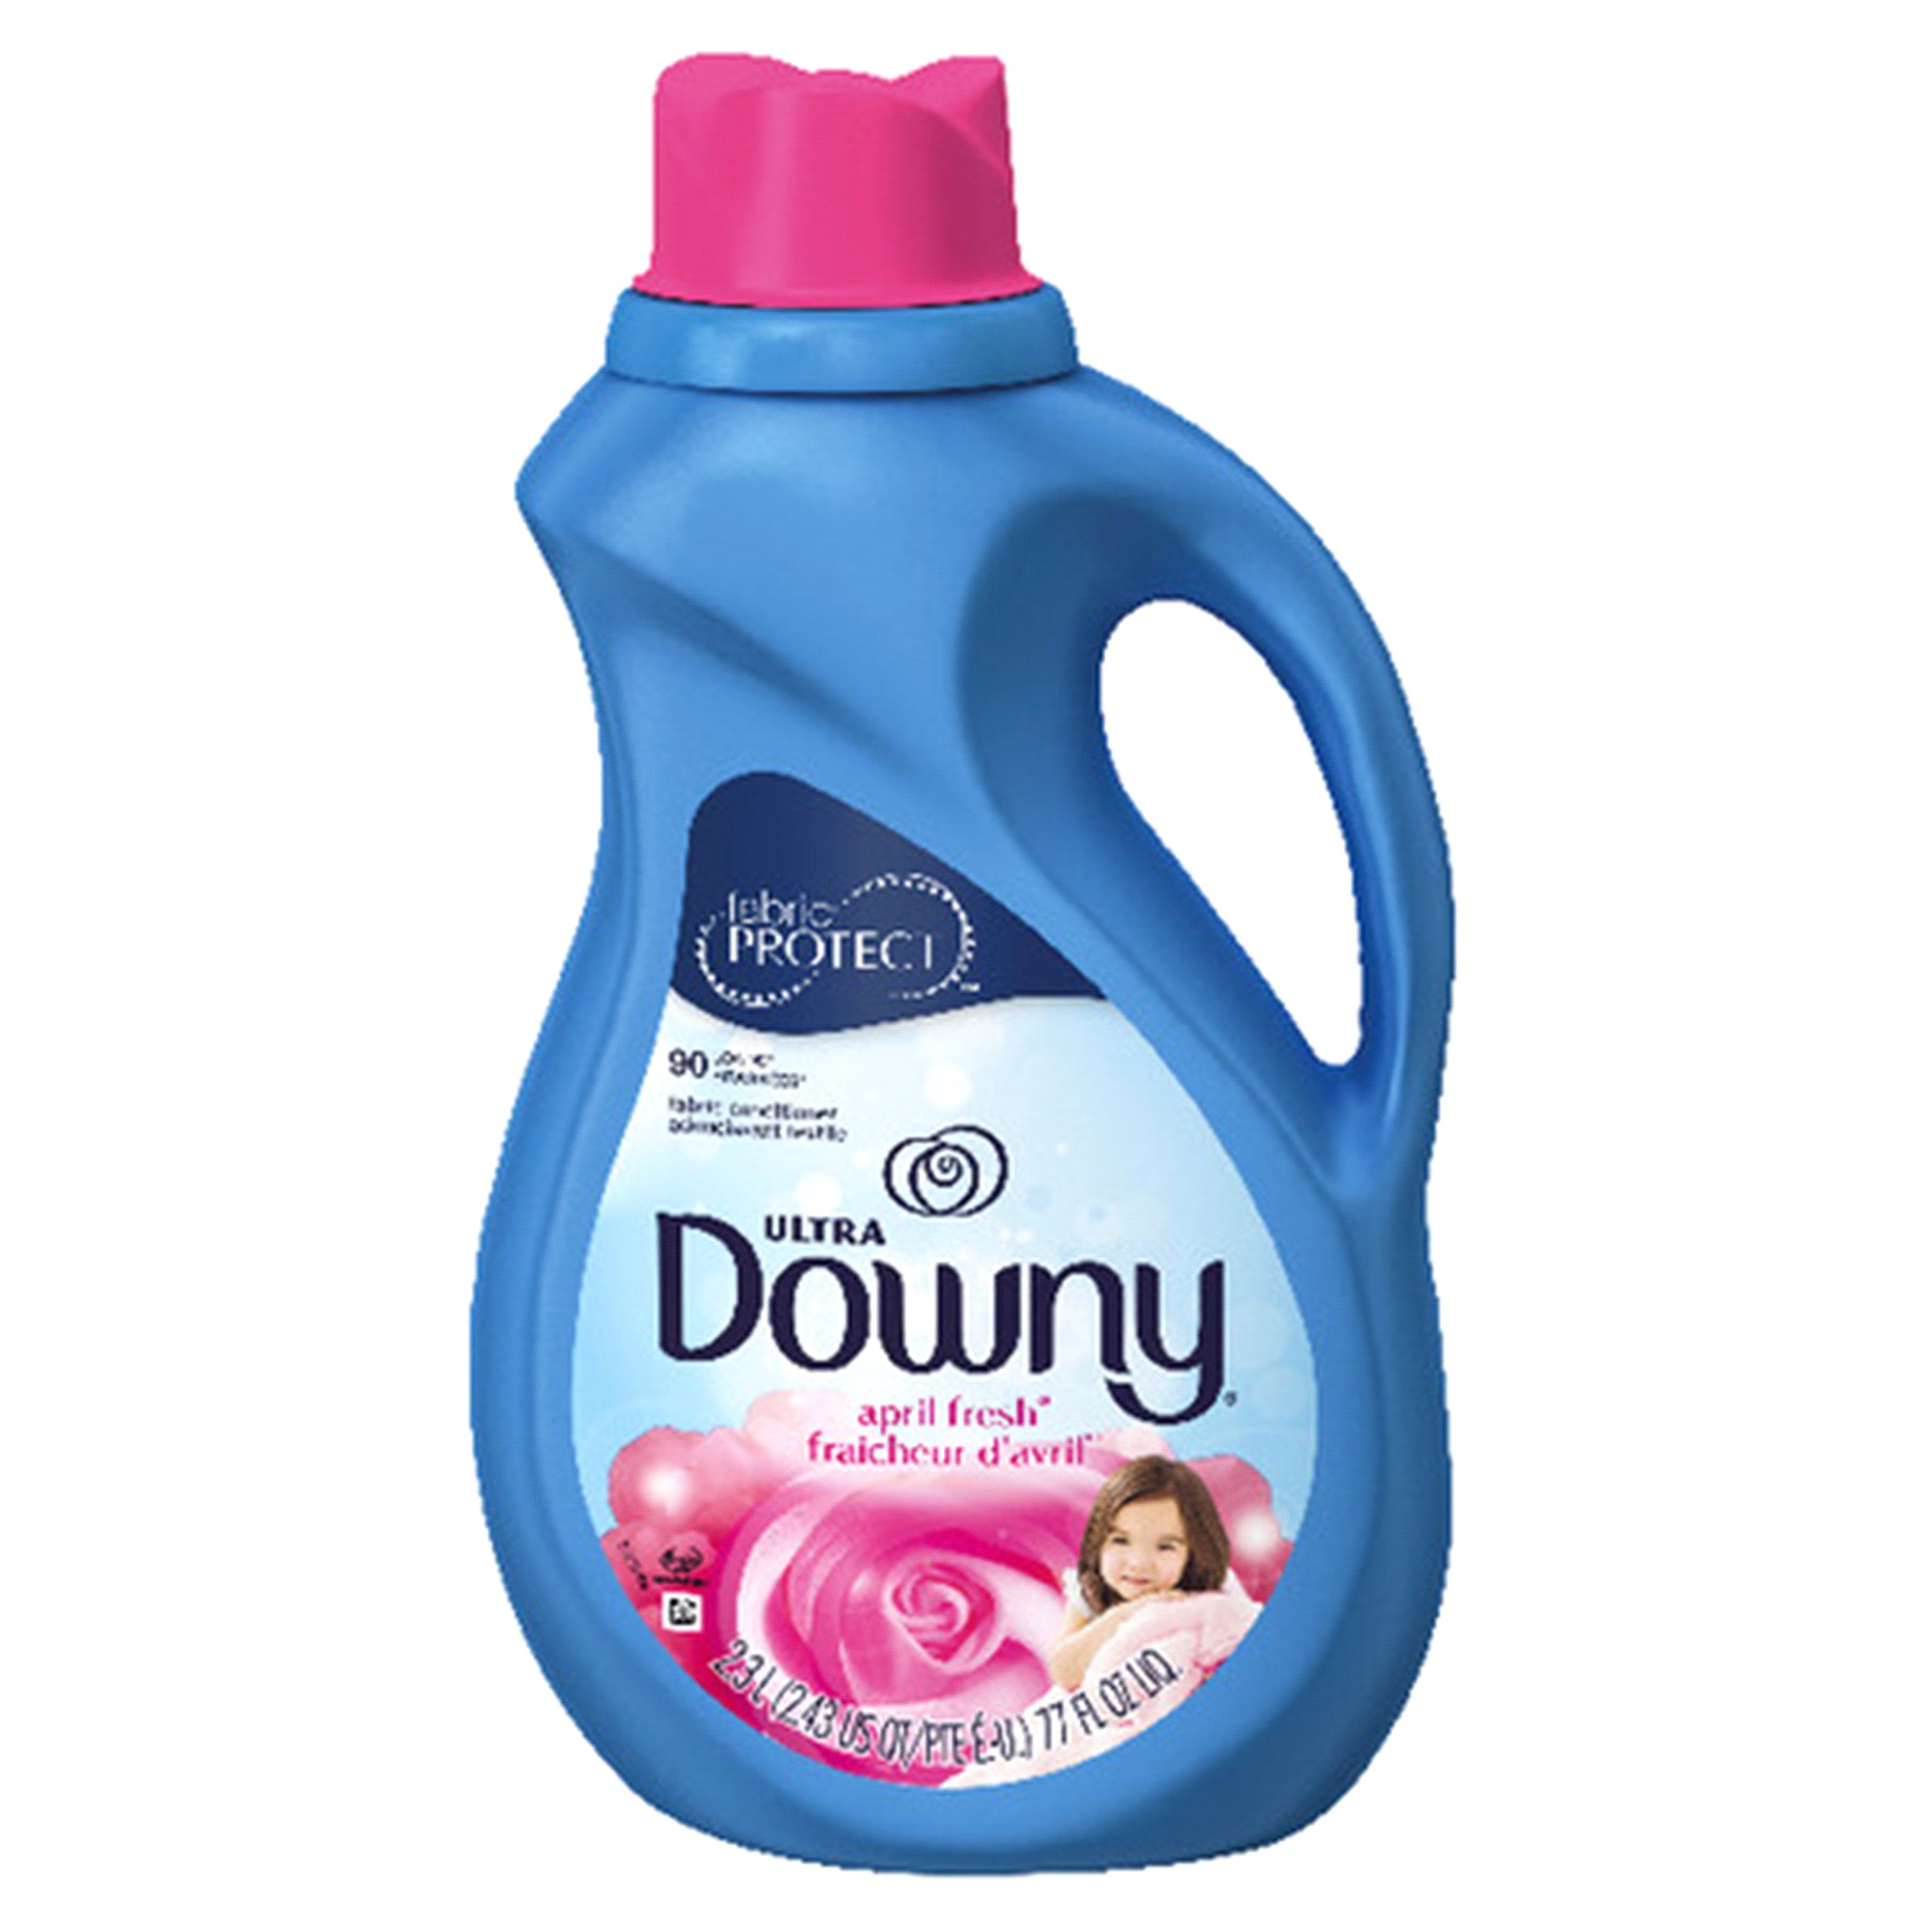 downy ultra concentrated april fresh scent 90 loads fabric softener 77 fl oz meijer com